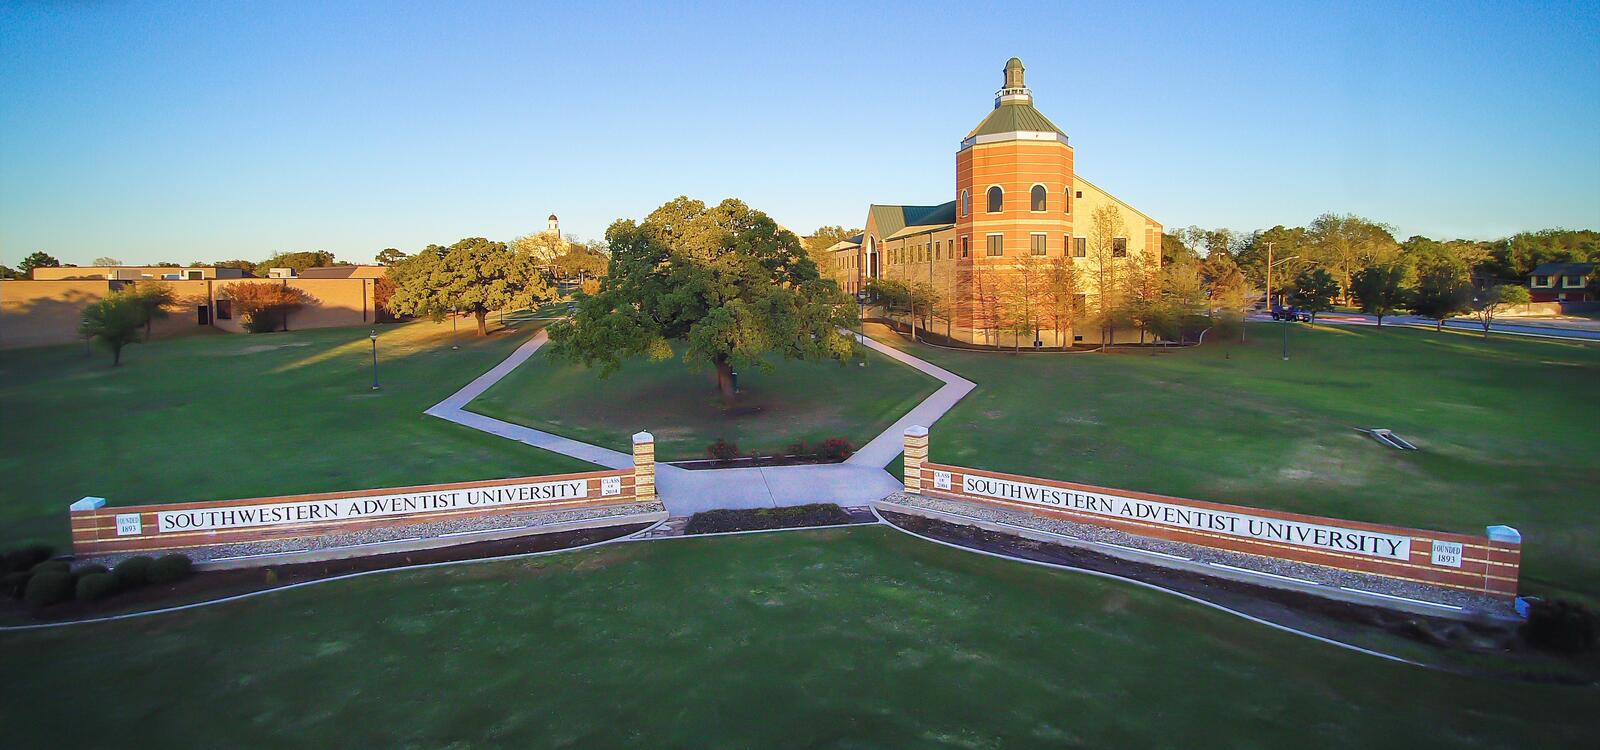 Birdseye view of the university, showcasing the Pechero building and two matching brick signs that read " Southwestern Adventist University"